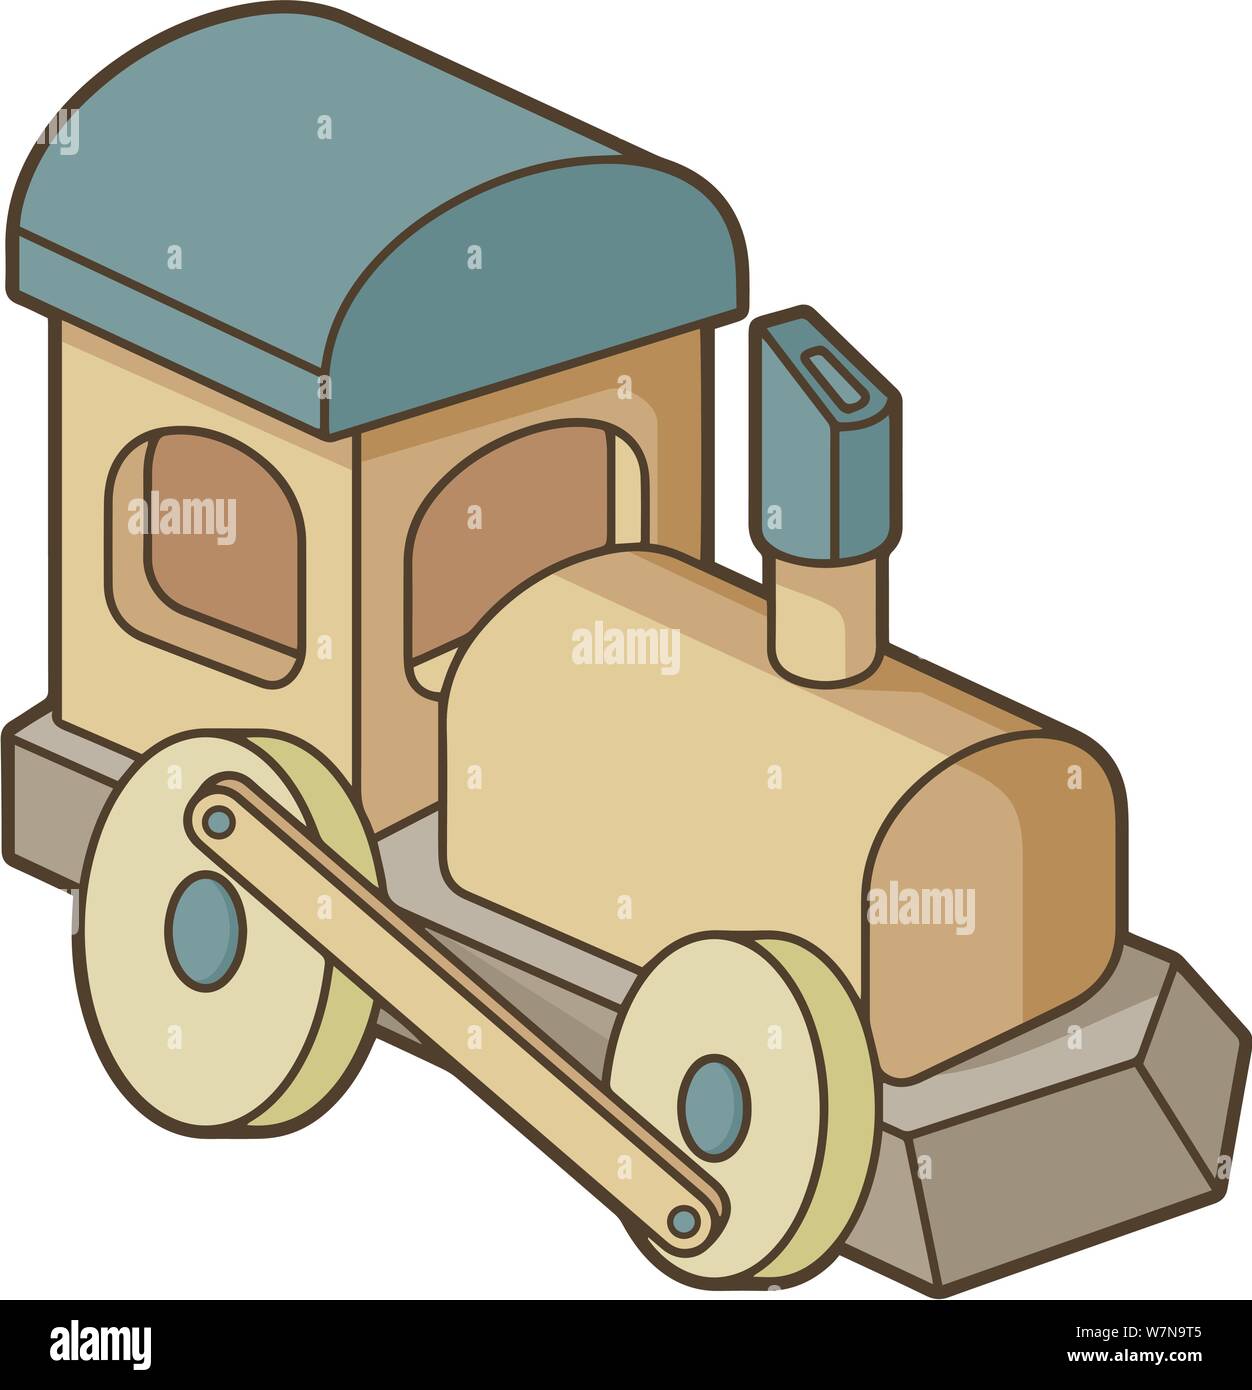 Wooden toy train icon in vintage color palette. Stock Vector